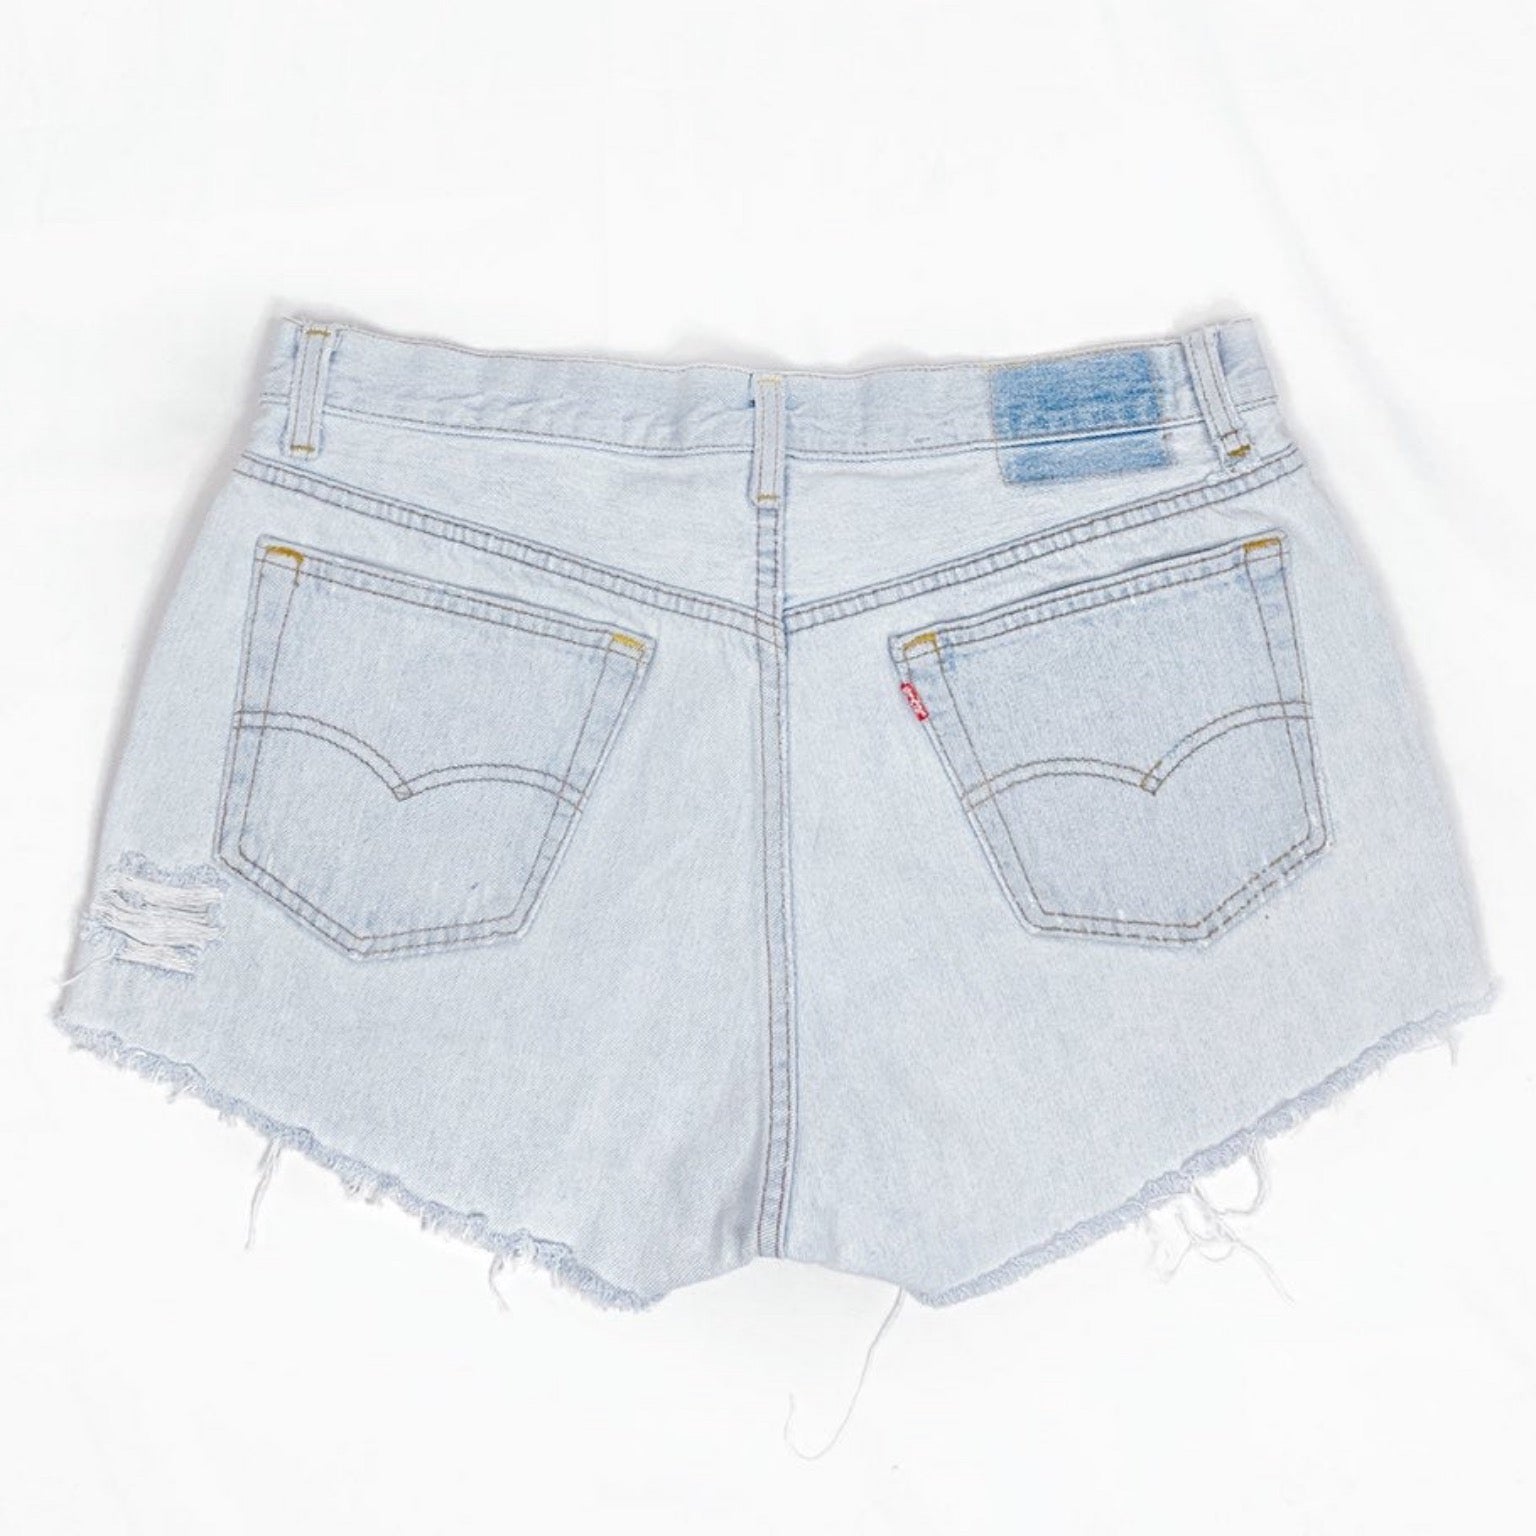 Vintage 501 Size 36 Distressed Light Wash High Waisted Levis Shorts